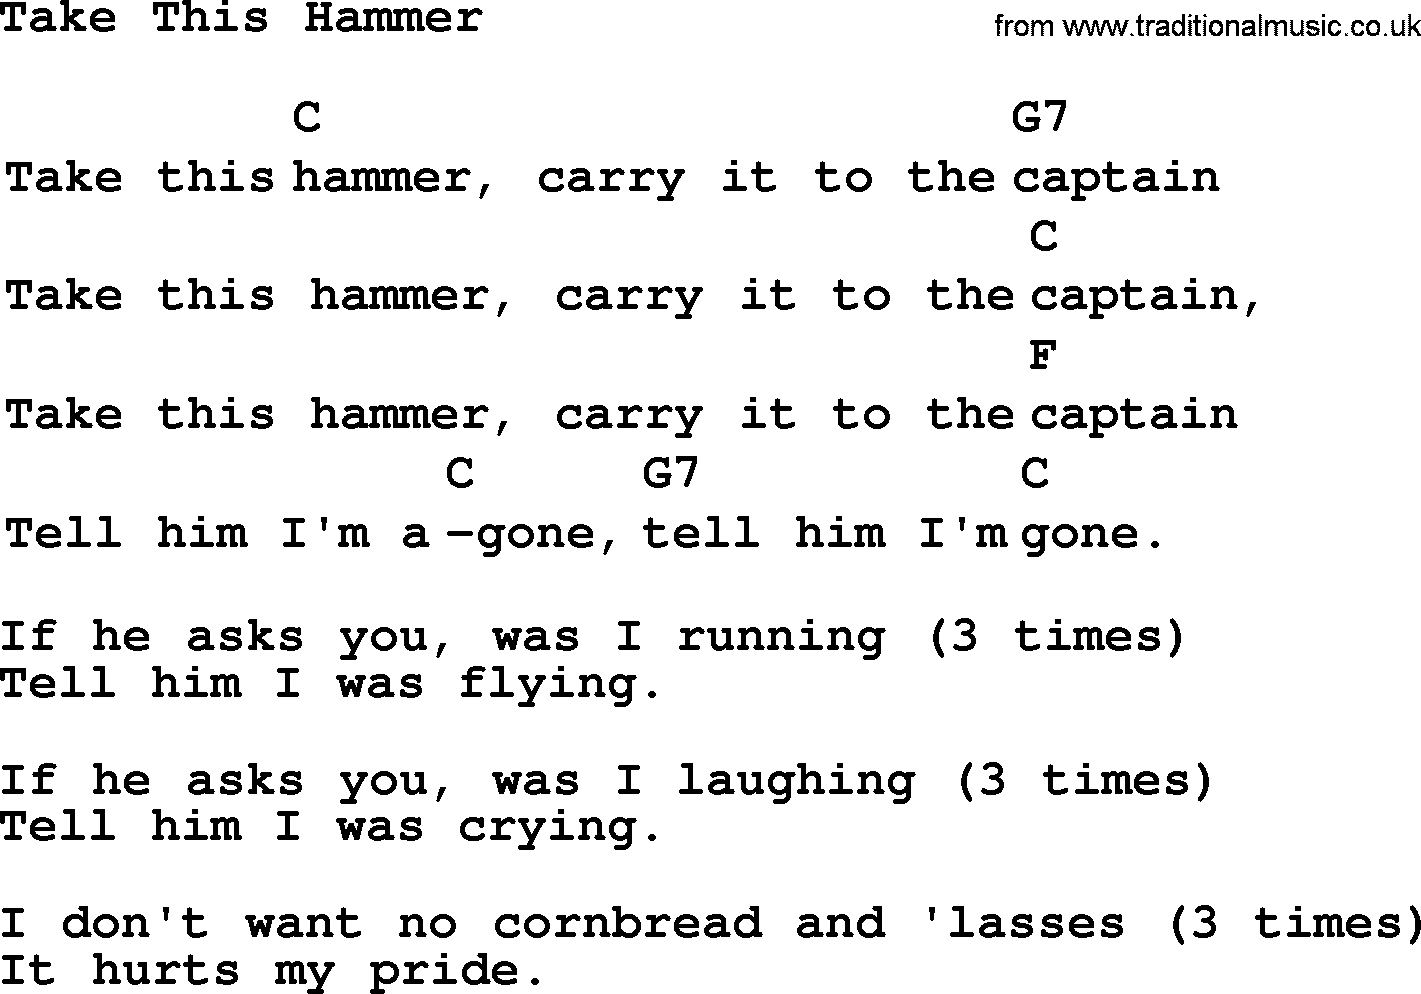 Top 1000 Most Popular Folk and Old-time Songs: Take This Hammer, lyrics and chords